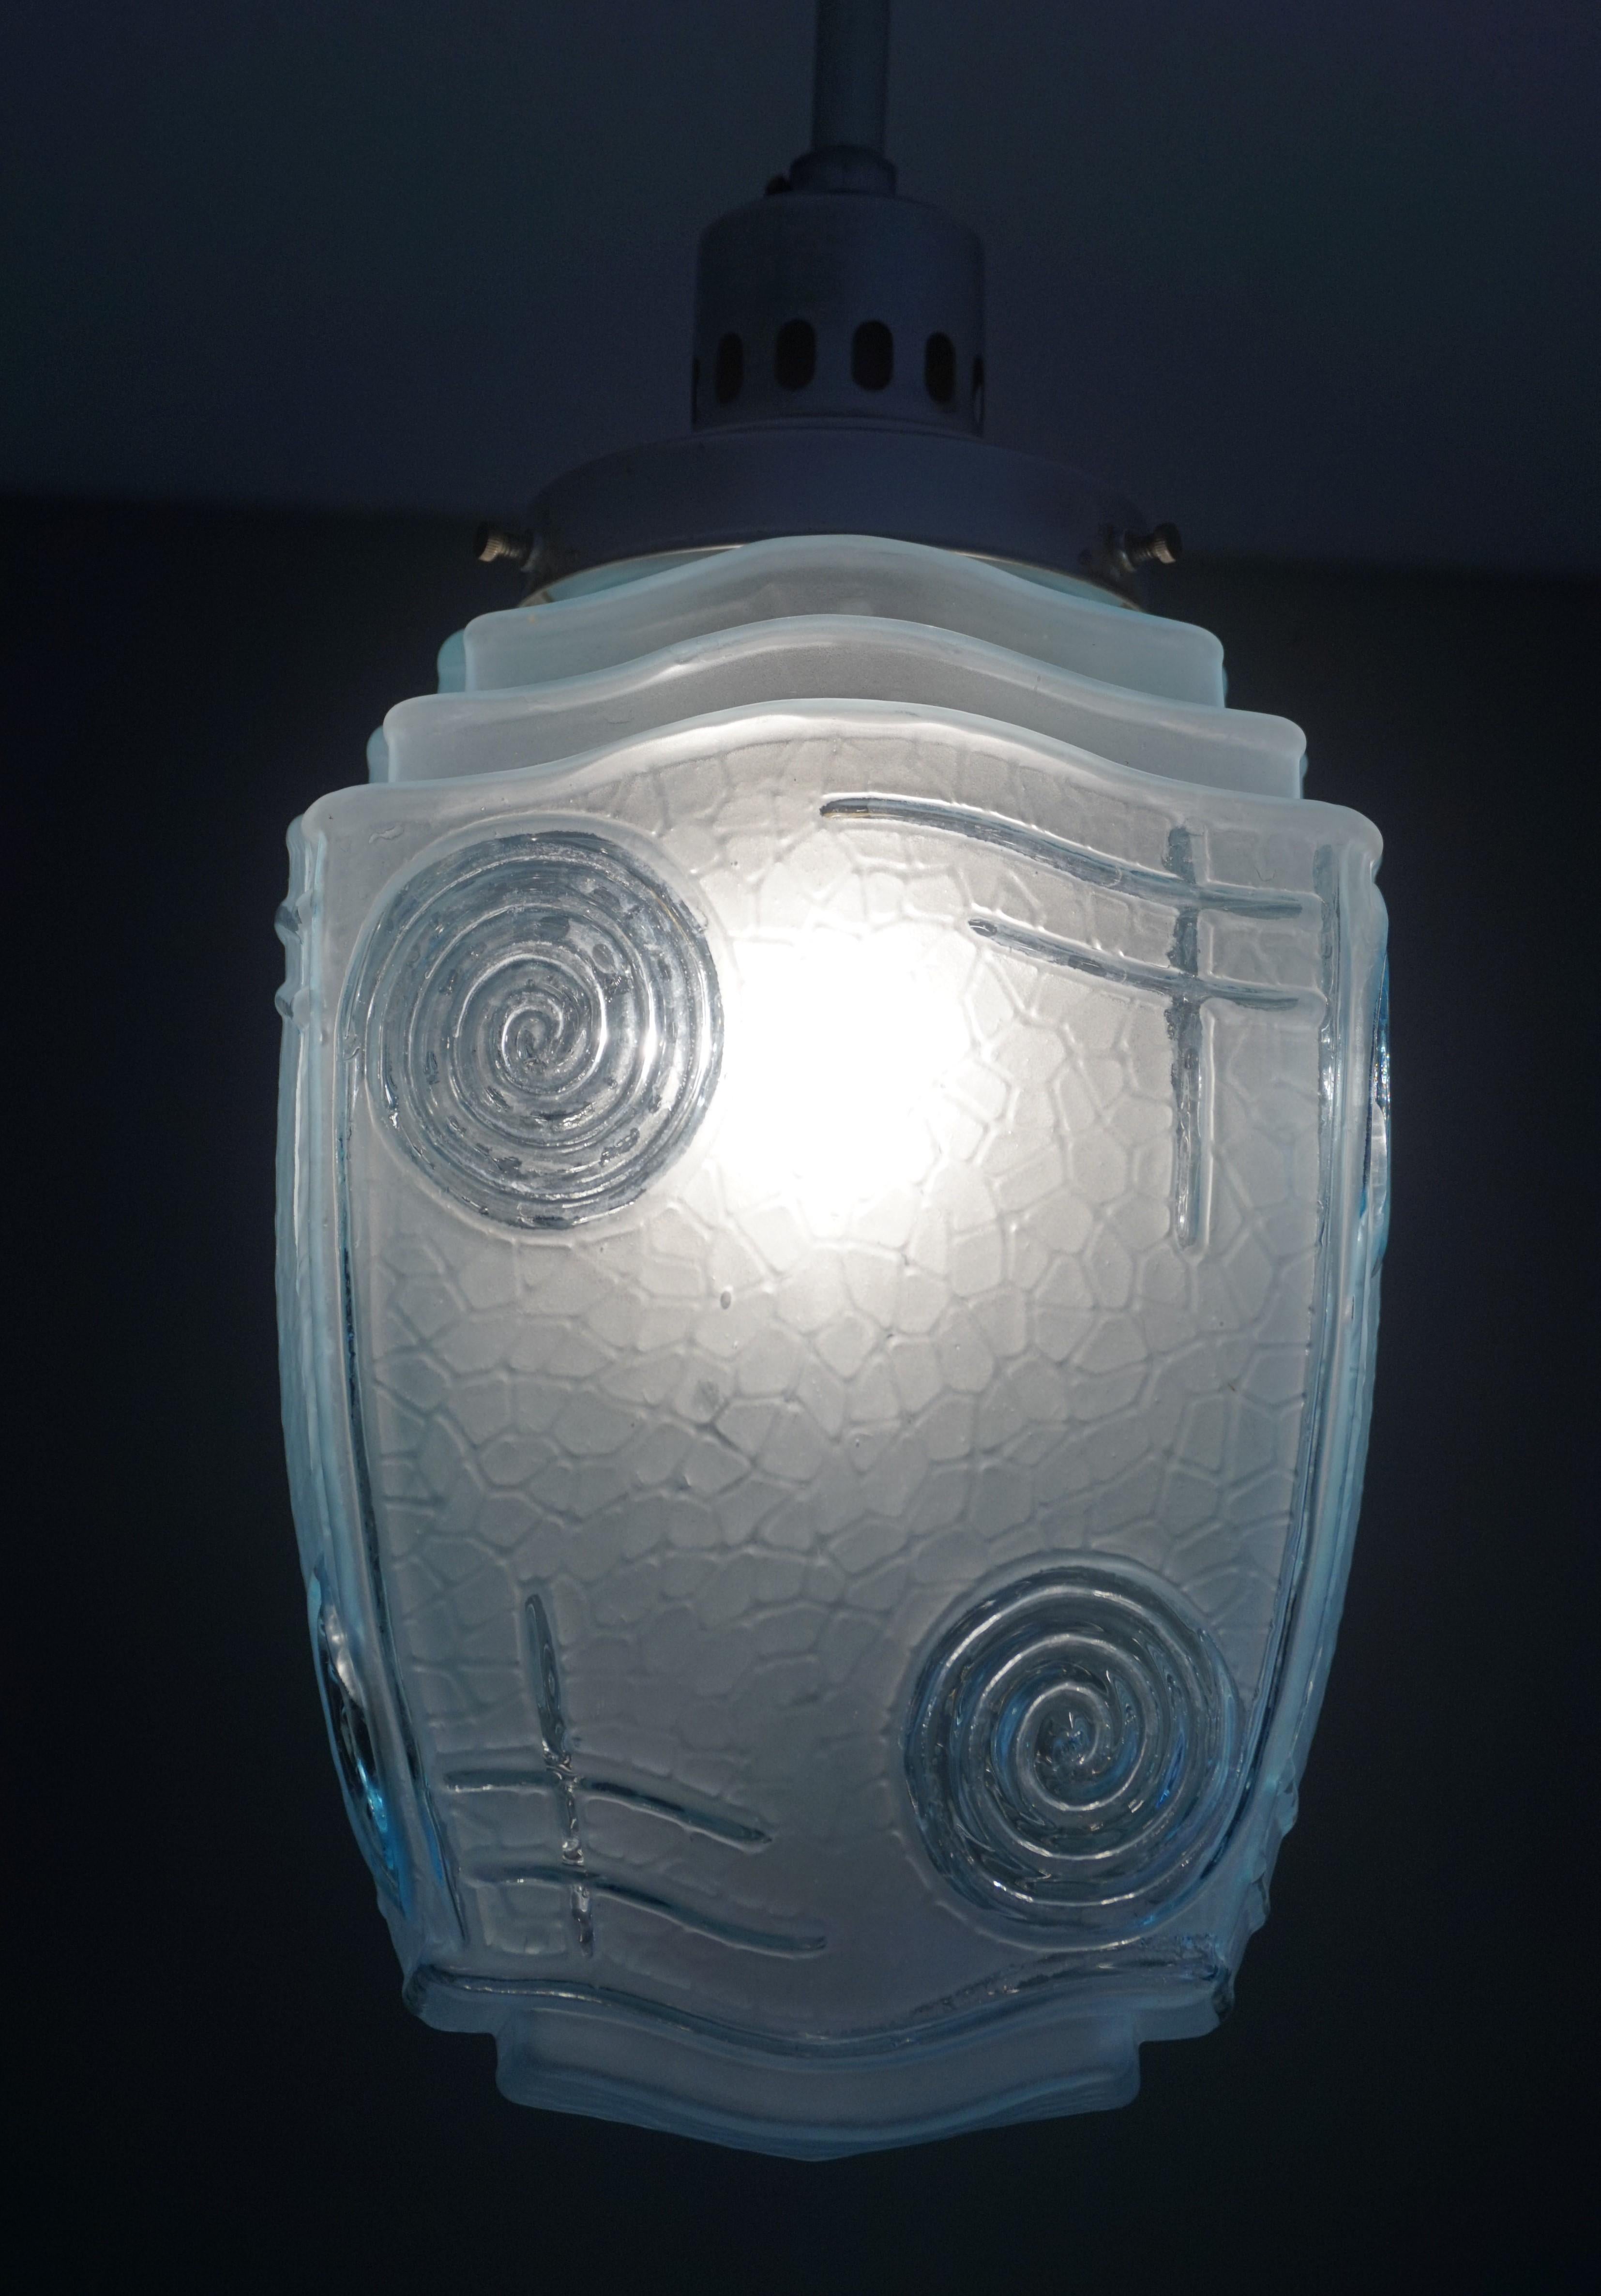 20th Century Rare and Excellent Condition Blue Glass and Chrome Metal Art Deco Pendant Light